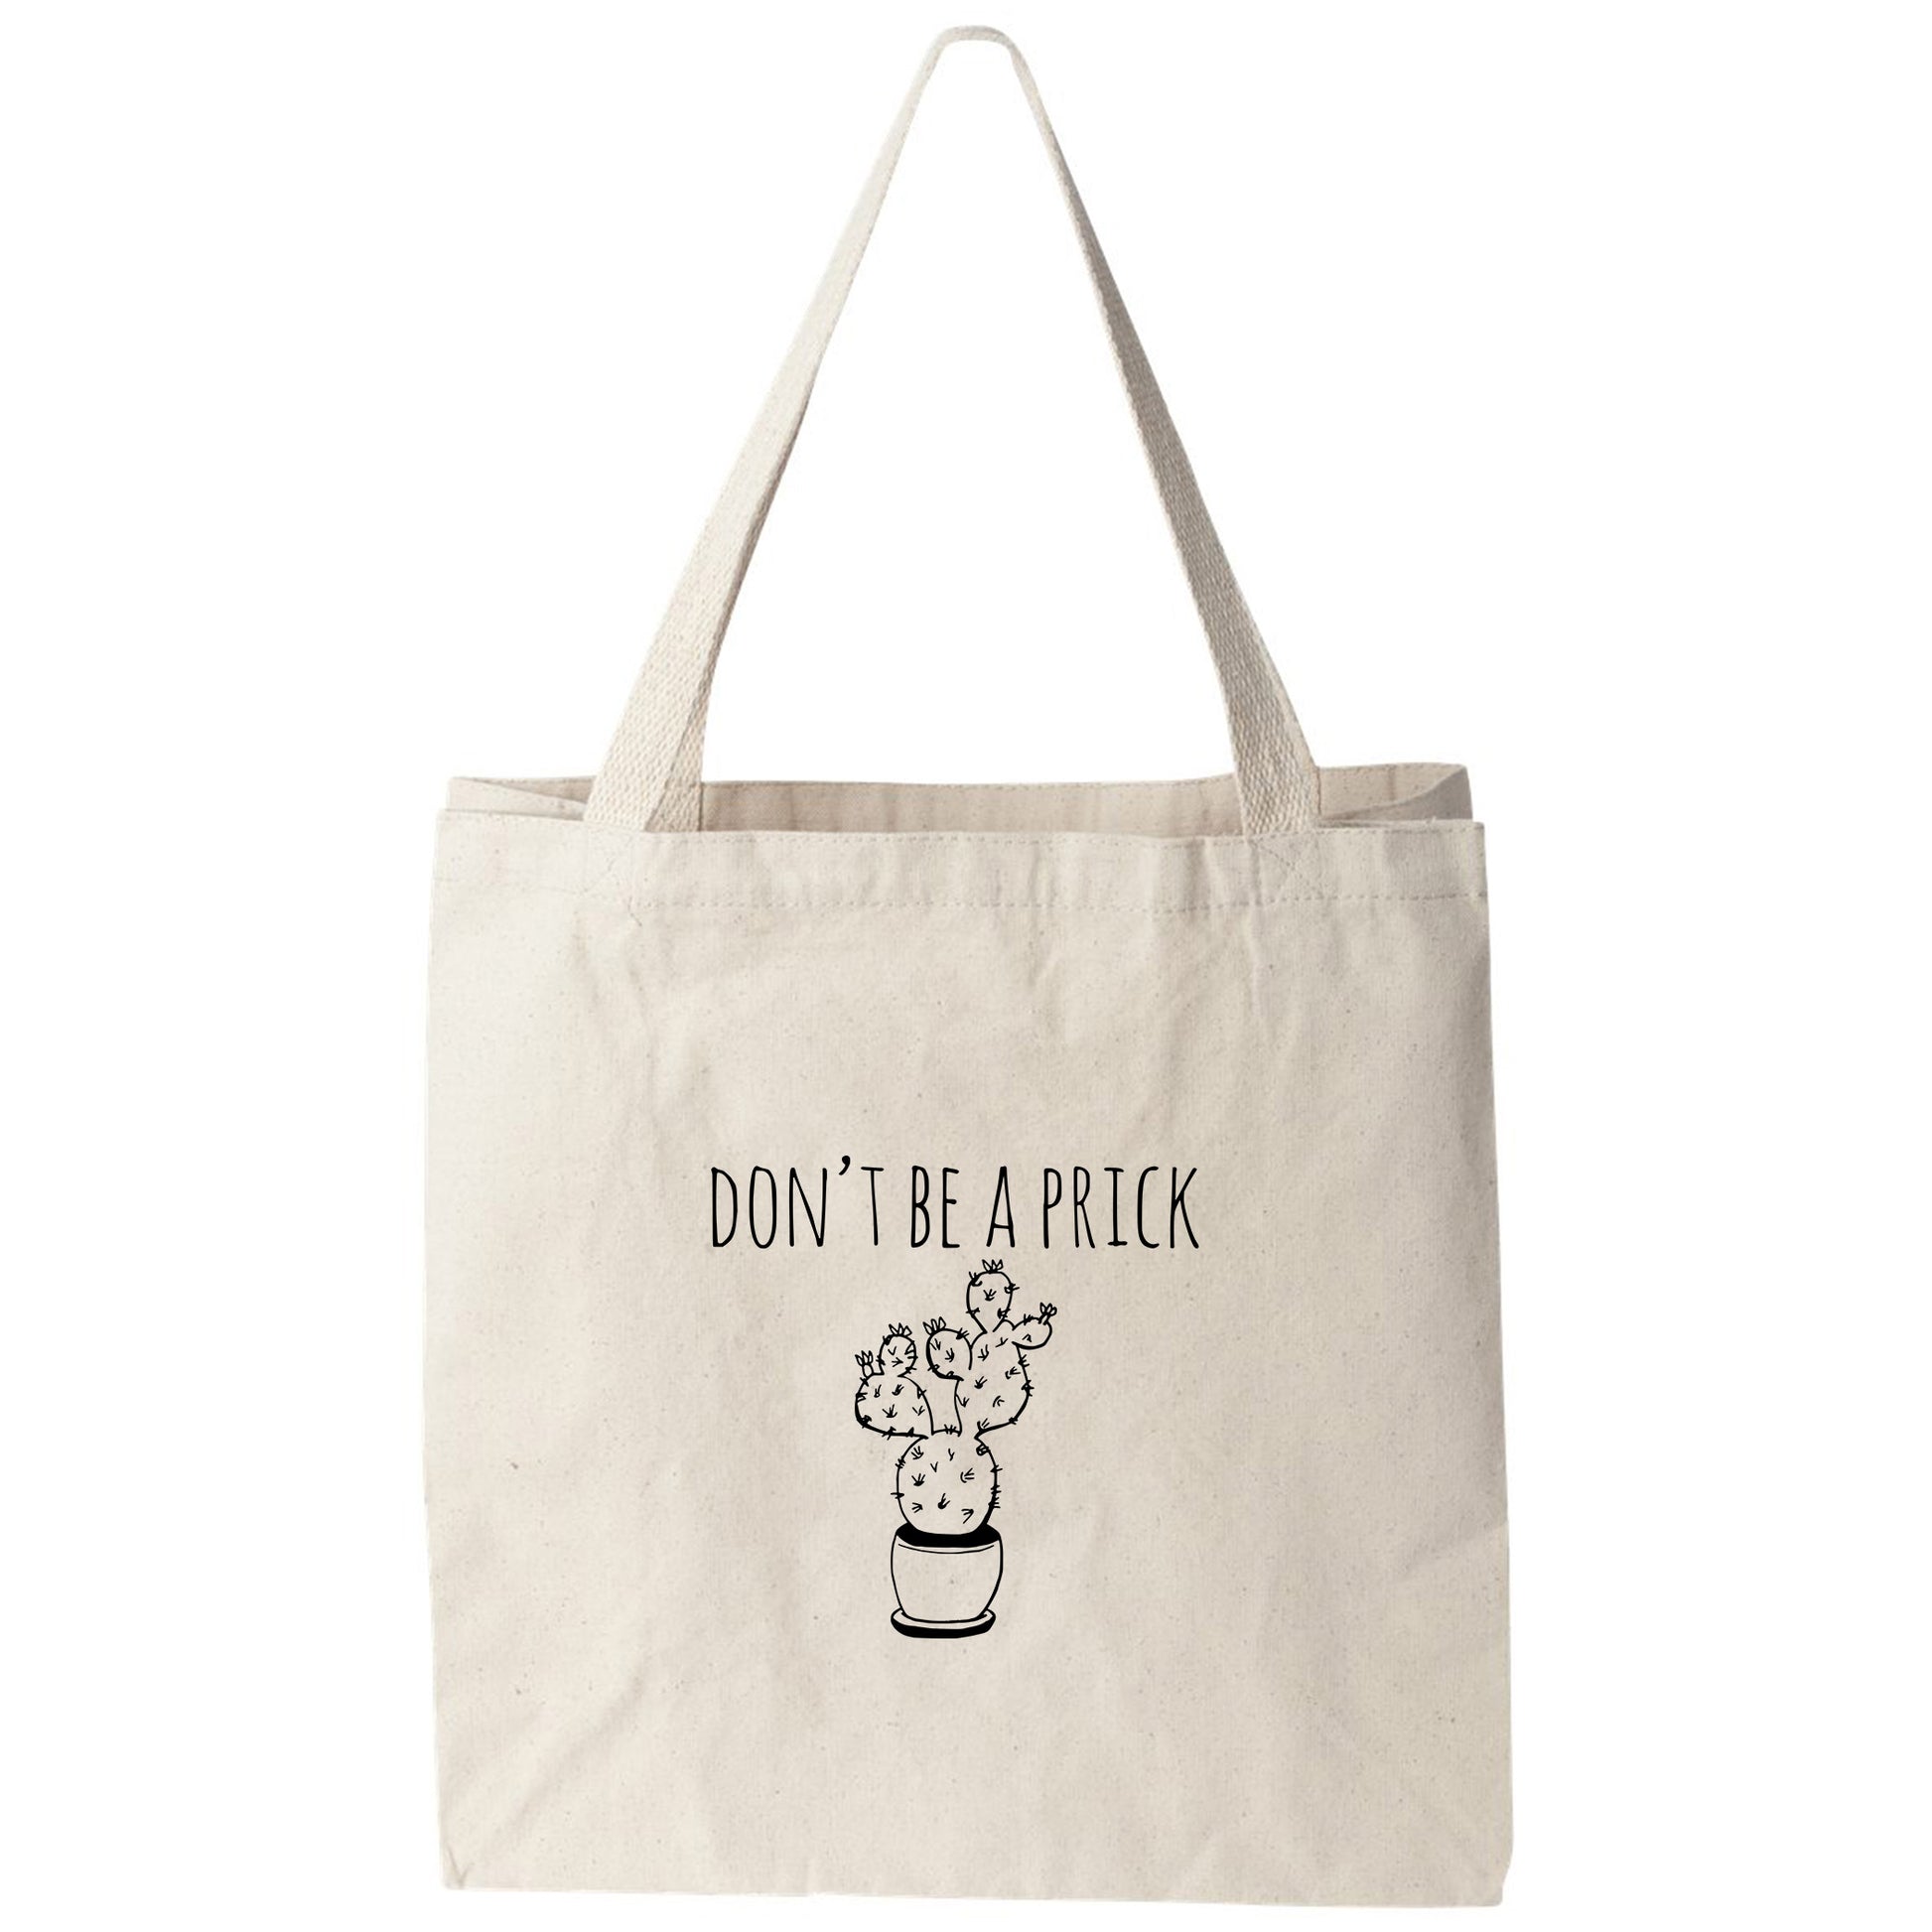 a tote bag that says don't be a prick